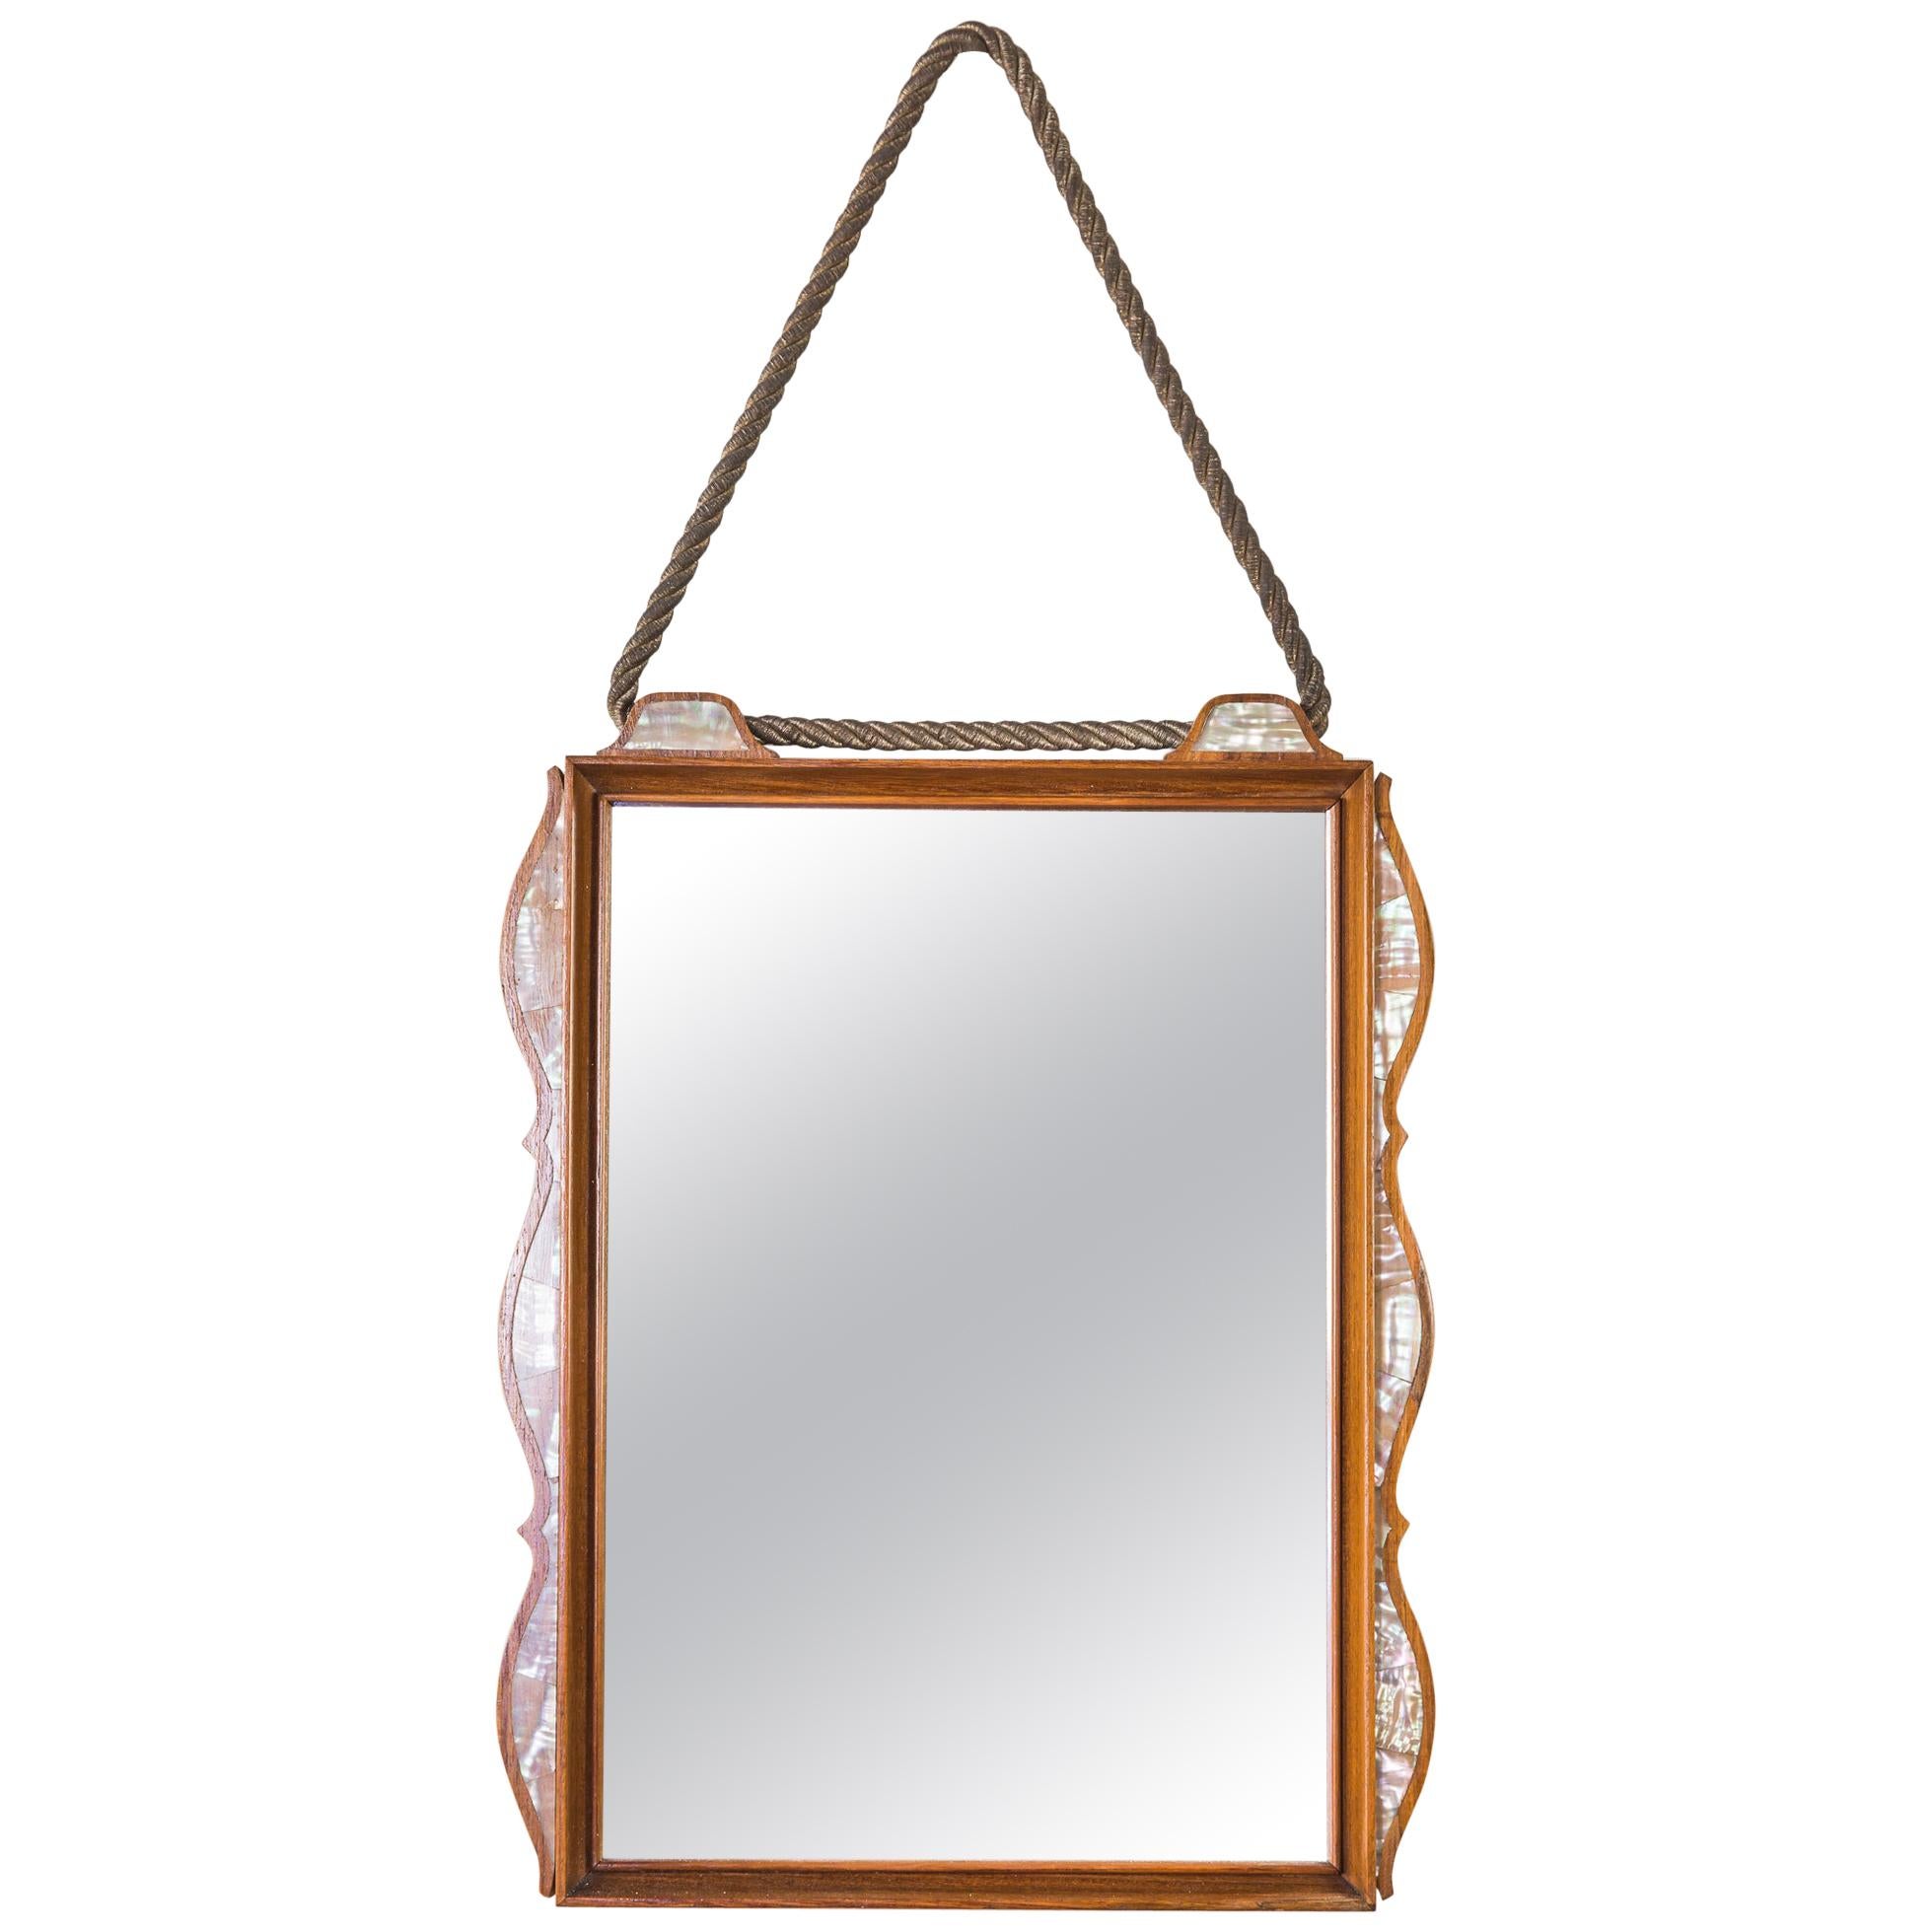 Mirror 1960s Nutwood with Nacre Inlays For Sale